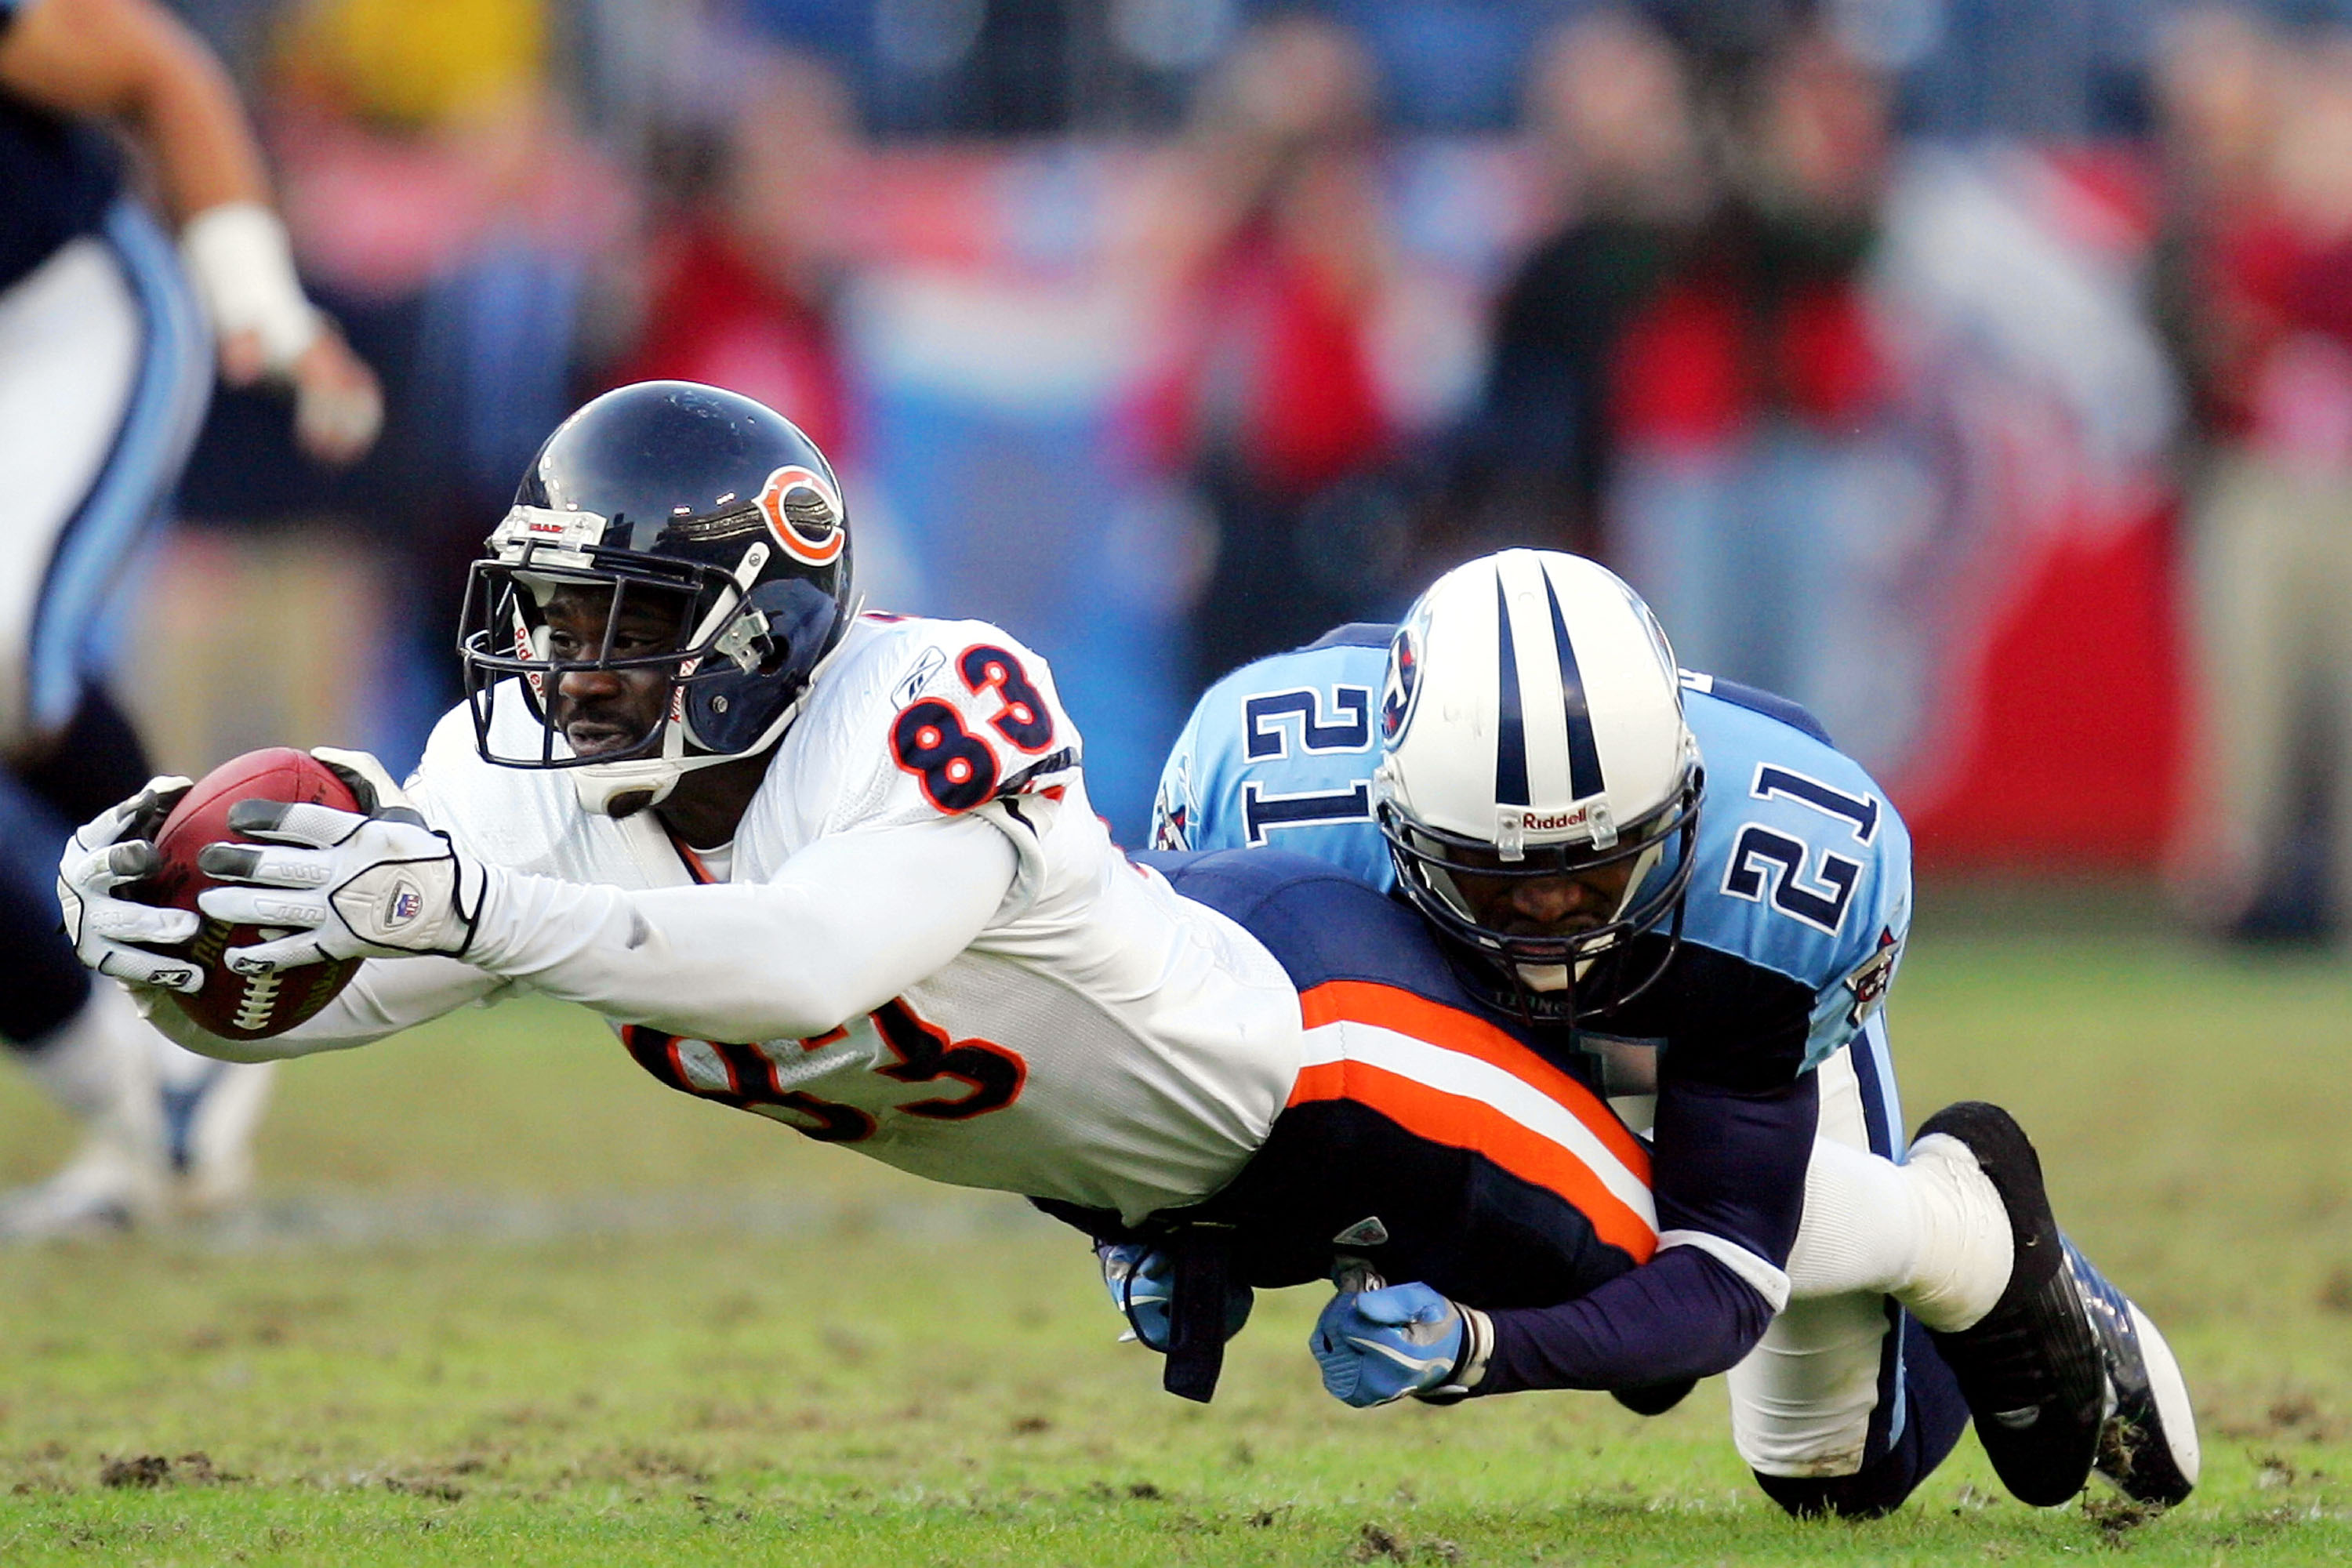 The Chicago Bears Fumbled on Its Top 2001 Draft Pick, David Terrell